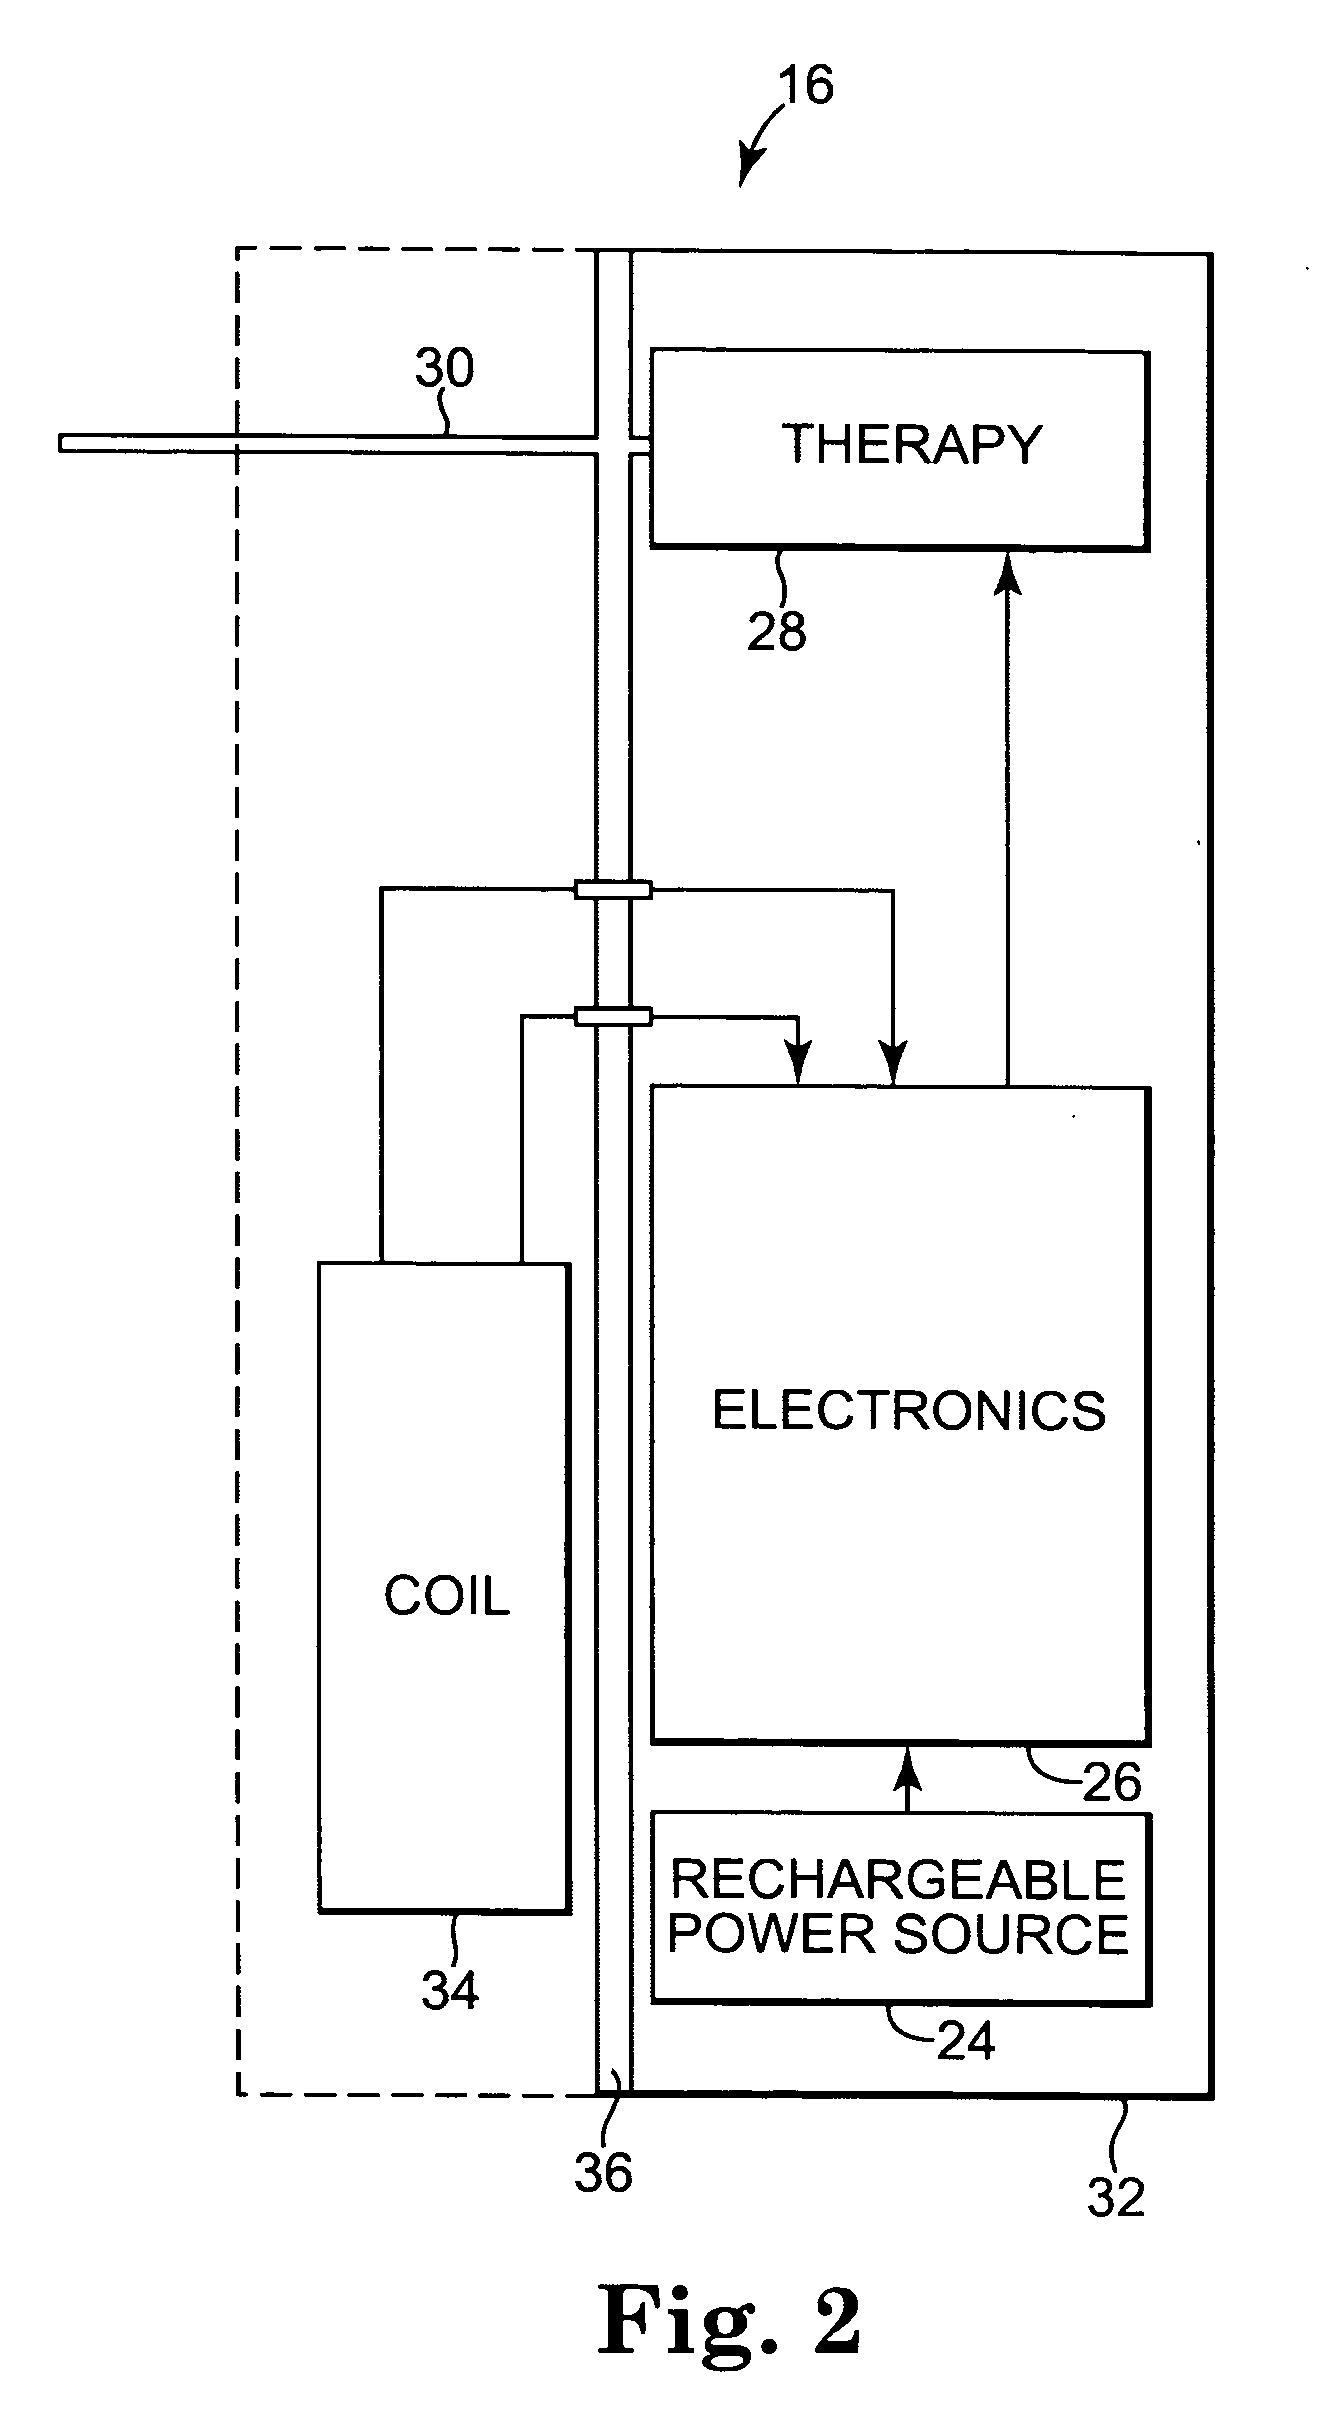 External power source, charger and system for an implantable medical device having thermal characteristics and method therefore